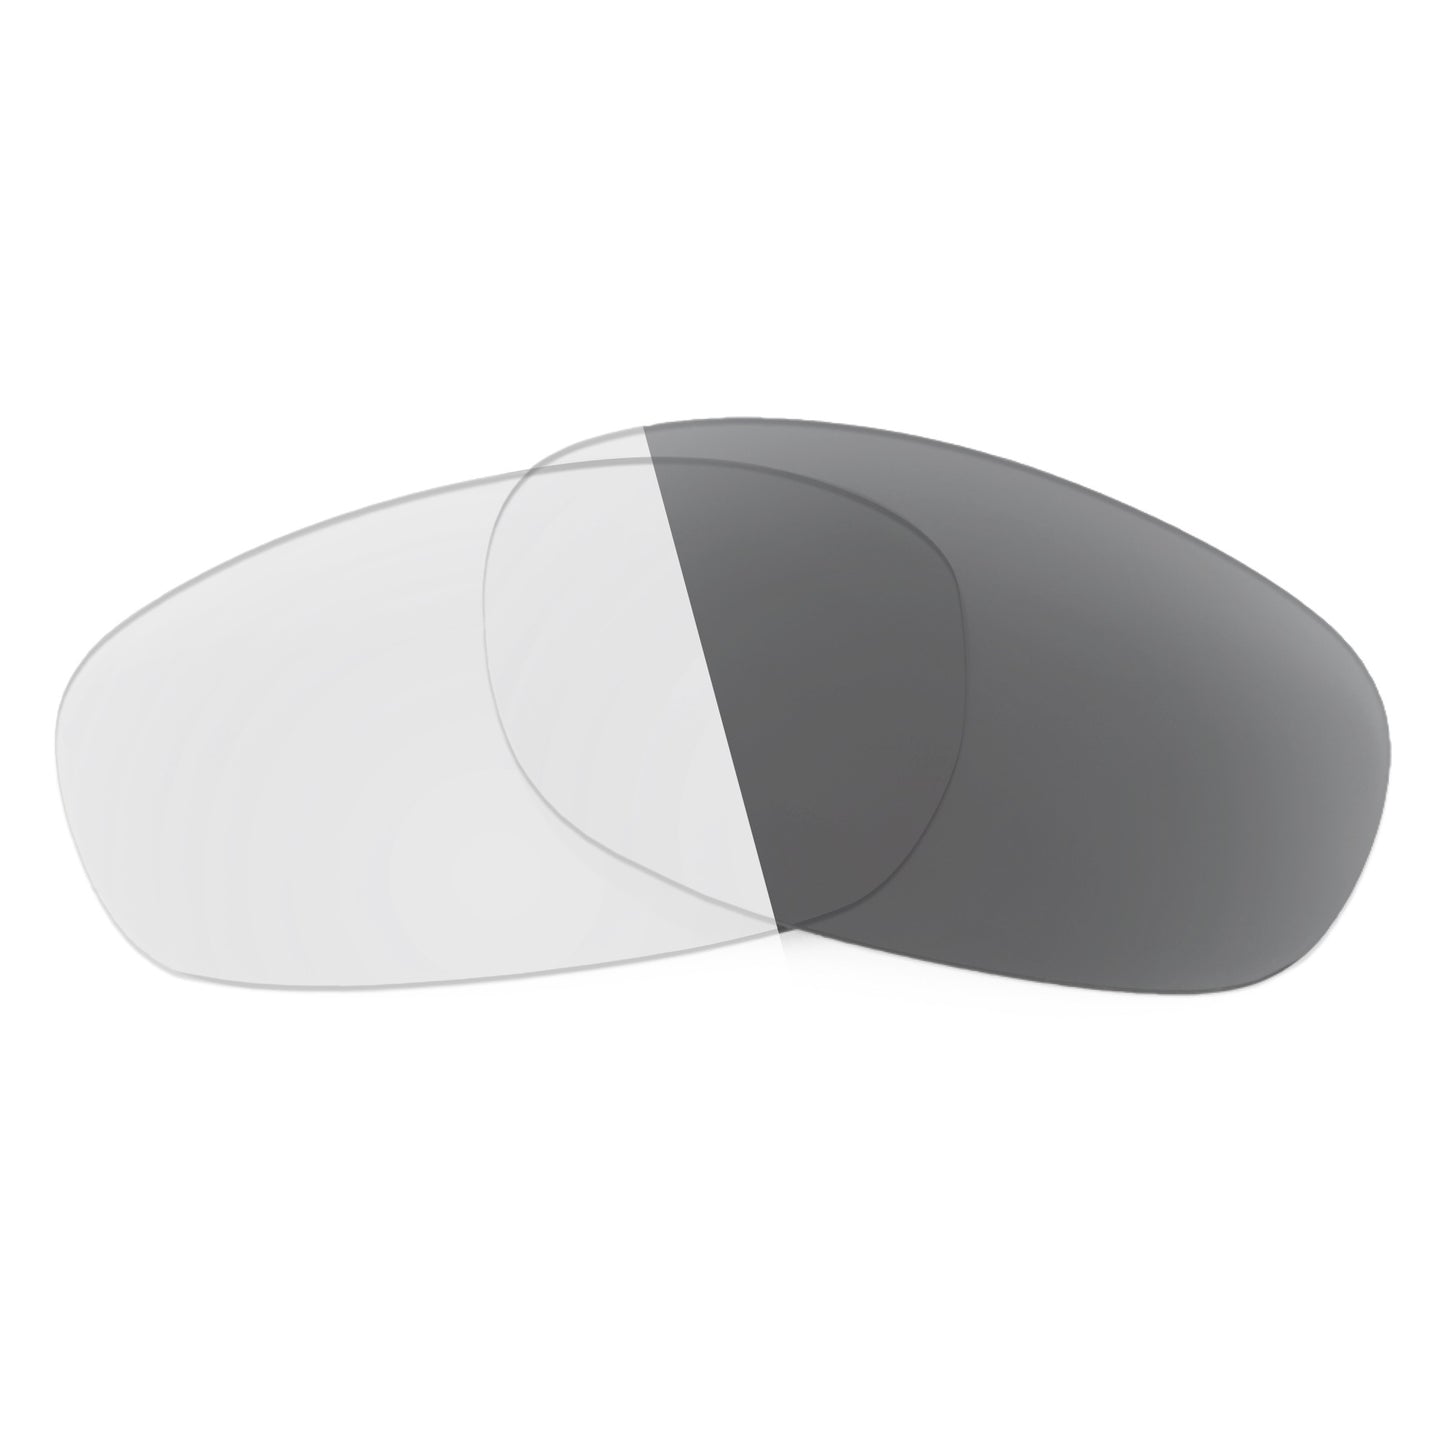 Revant replacement lenses for Ray-Ban Olympian RB3119 62mm Non-Polarized Adapt Gray Photochromic